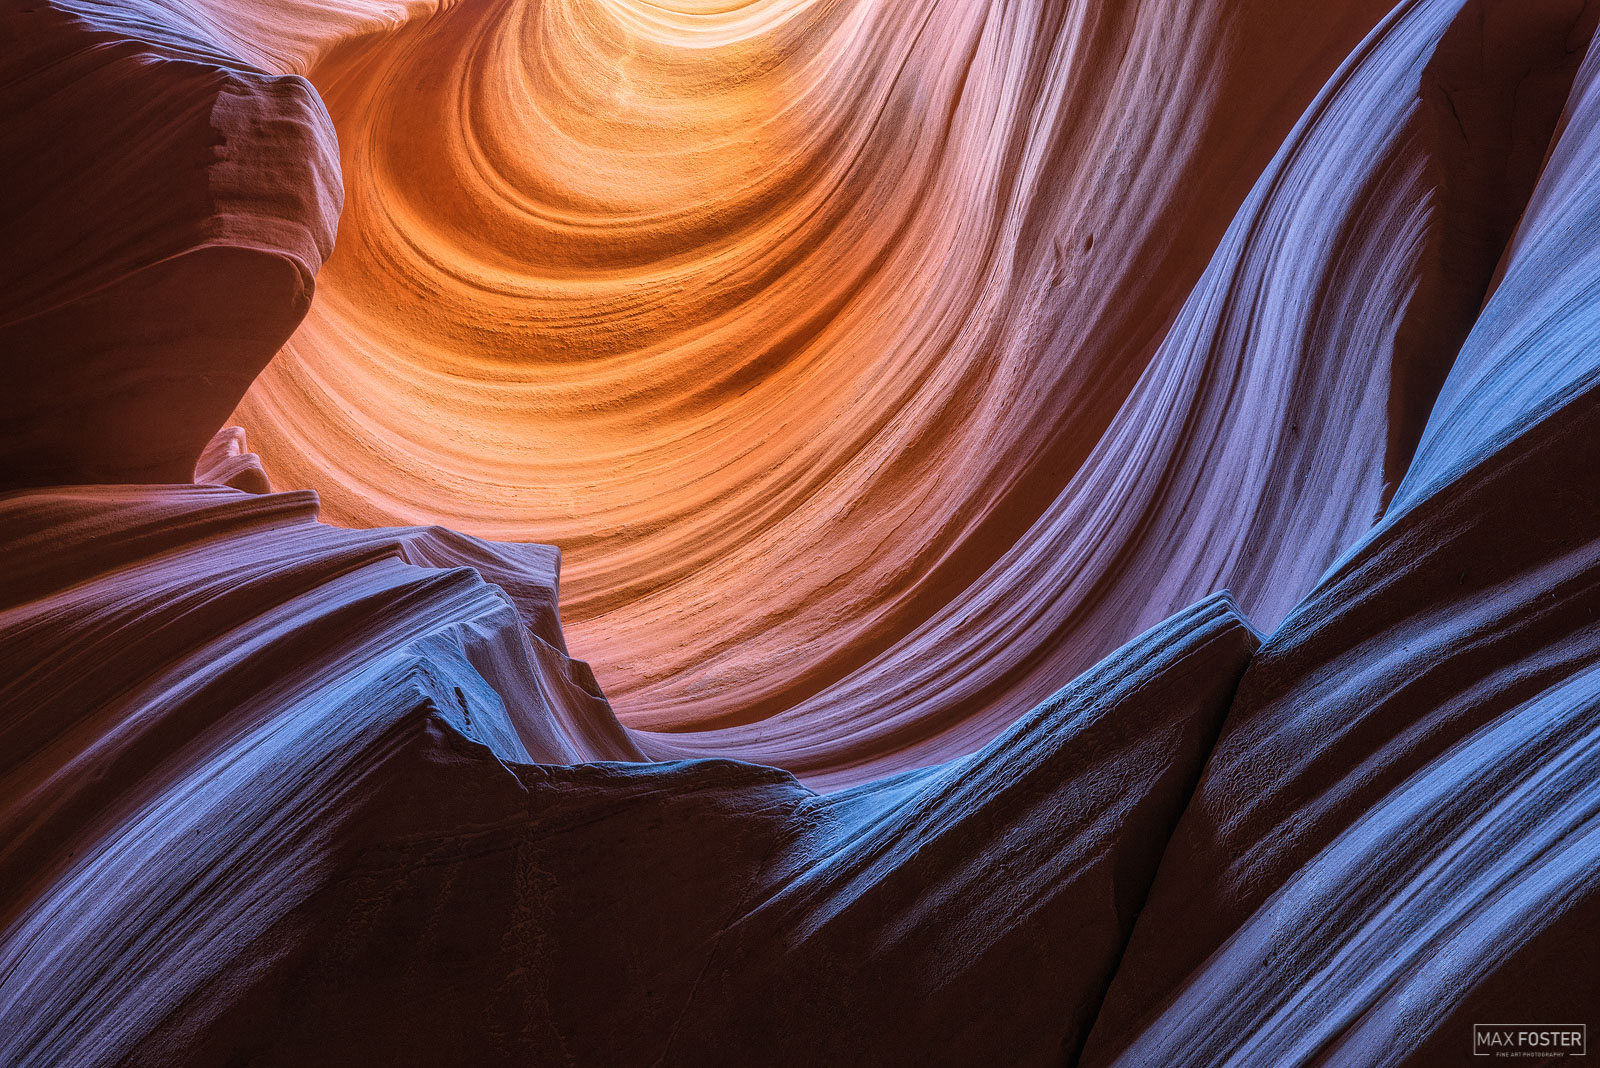 Refresh your space with Lightwaves, Max Foster's limited edition photography print of a slot canyon in Page, Arizona from his...